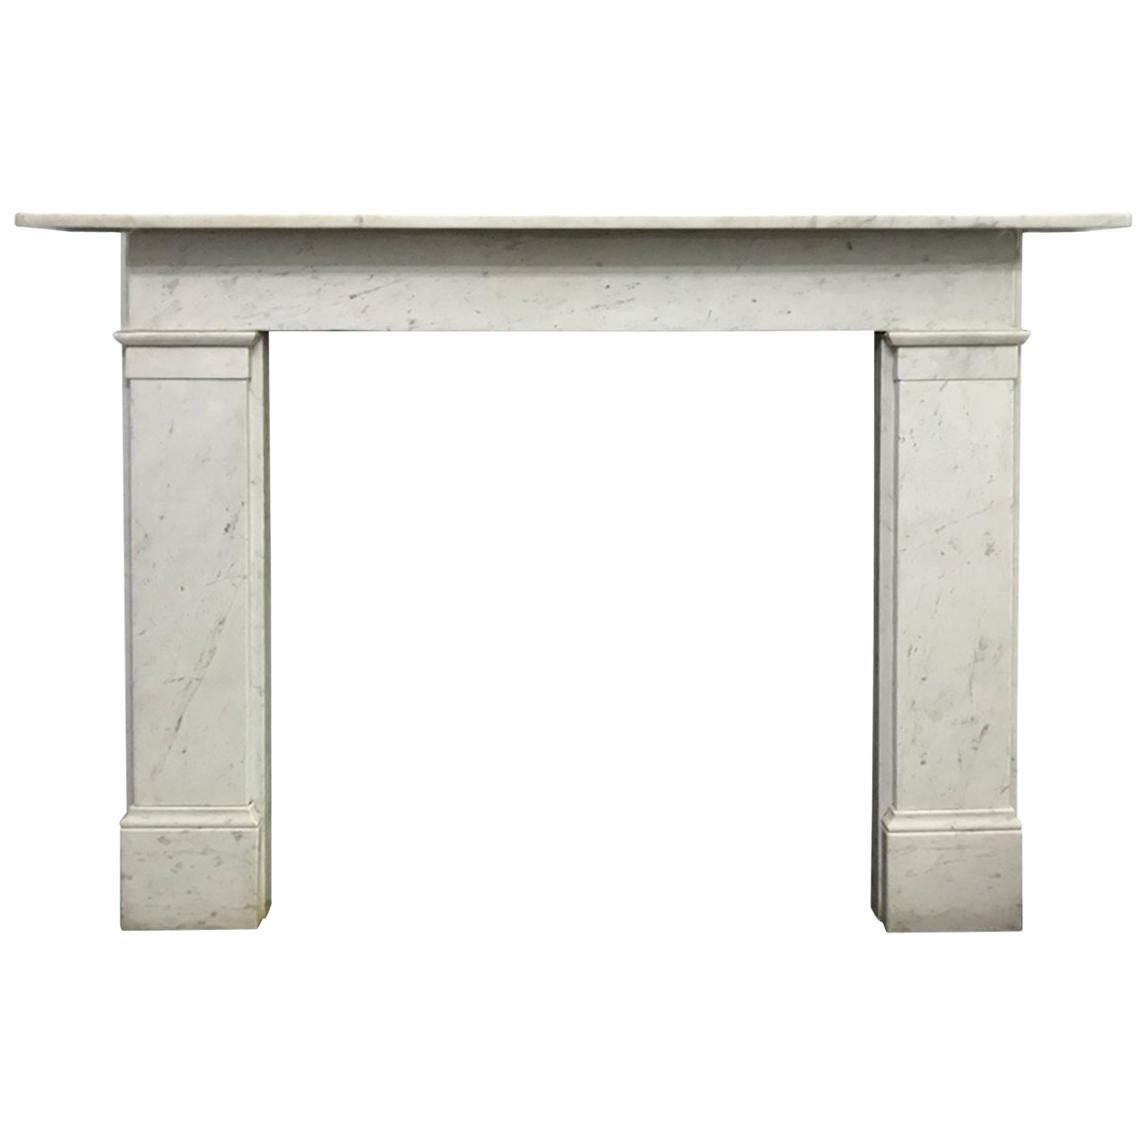 Simple Reclaimed Victorian Carrara Marble Fireplace Surround